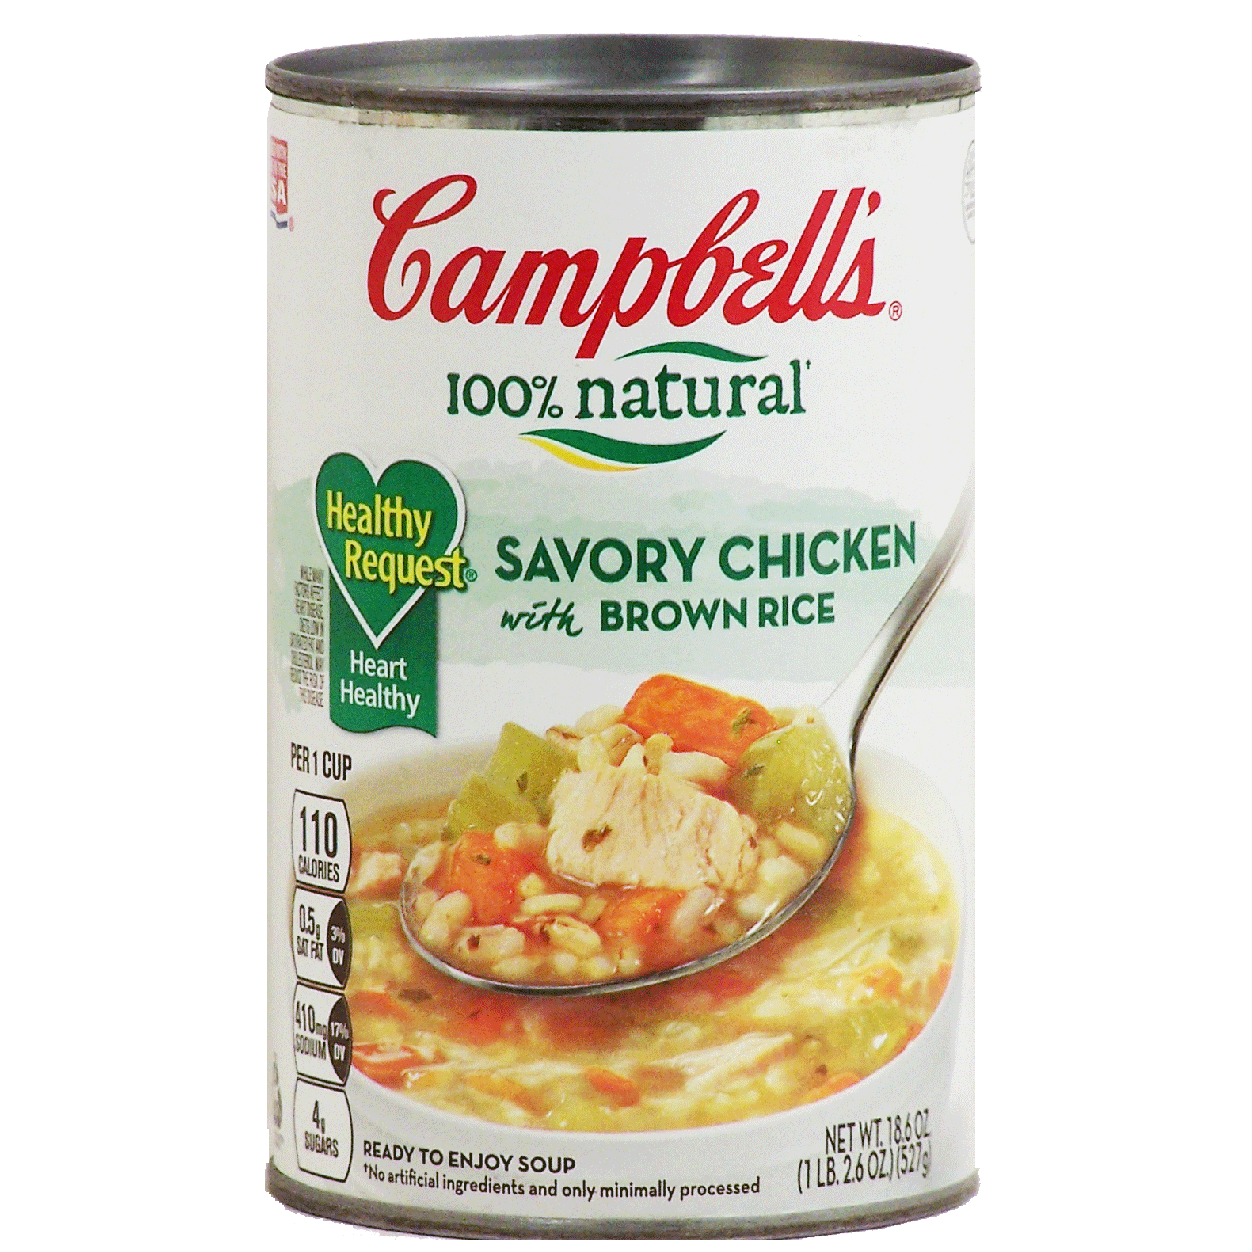 Campbell's 100% Natural Healthy Request, Savory chicken with bro18.6oz ...